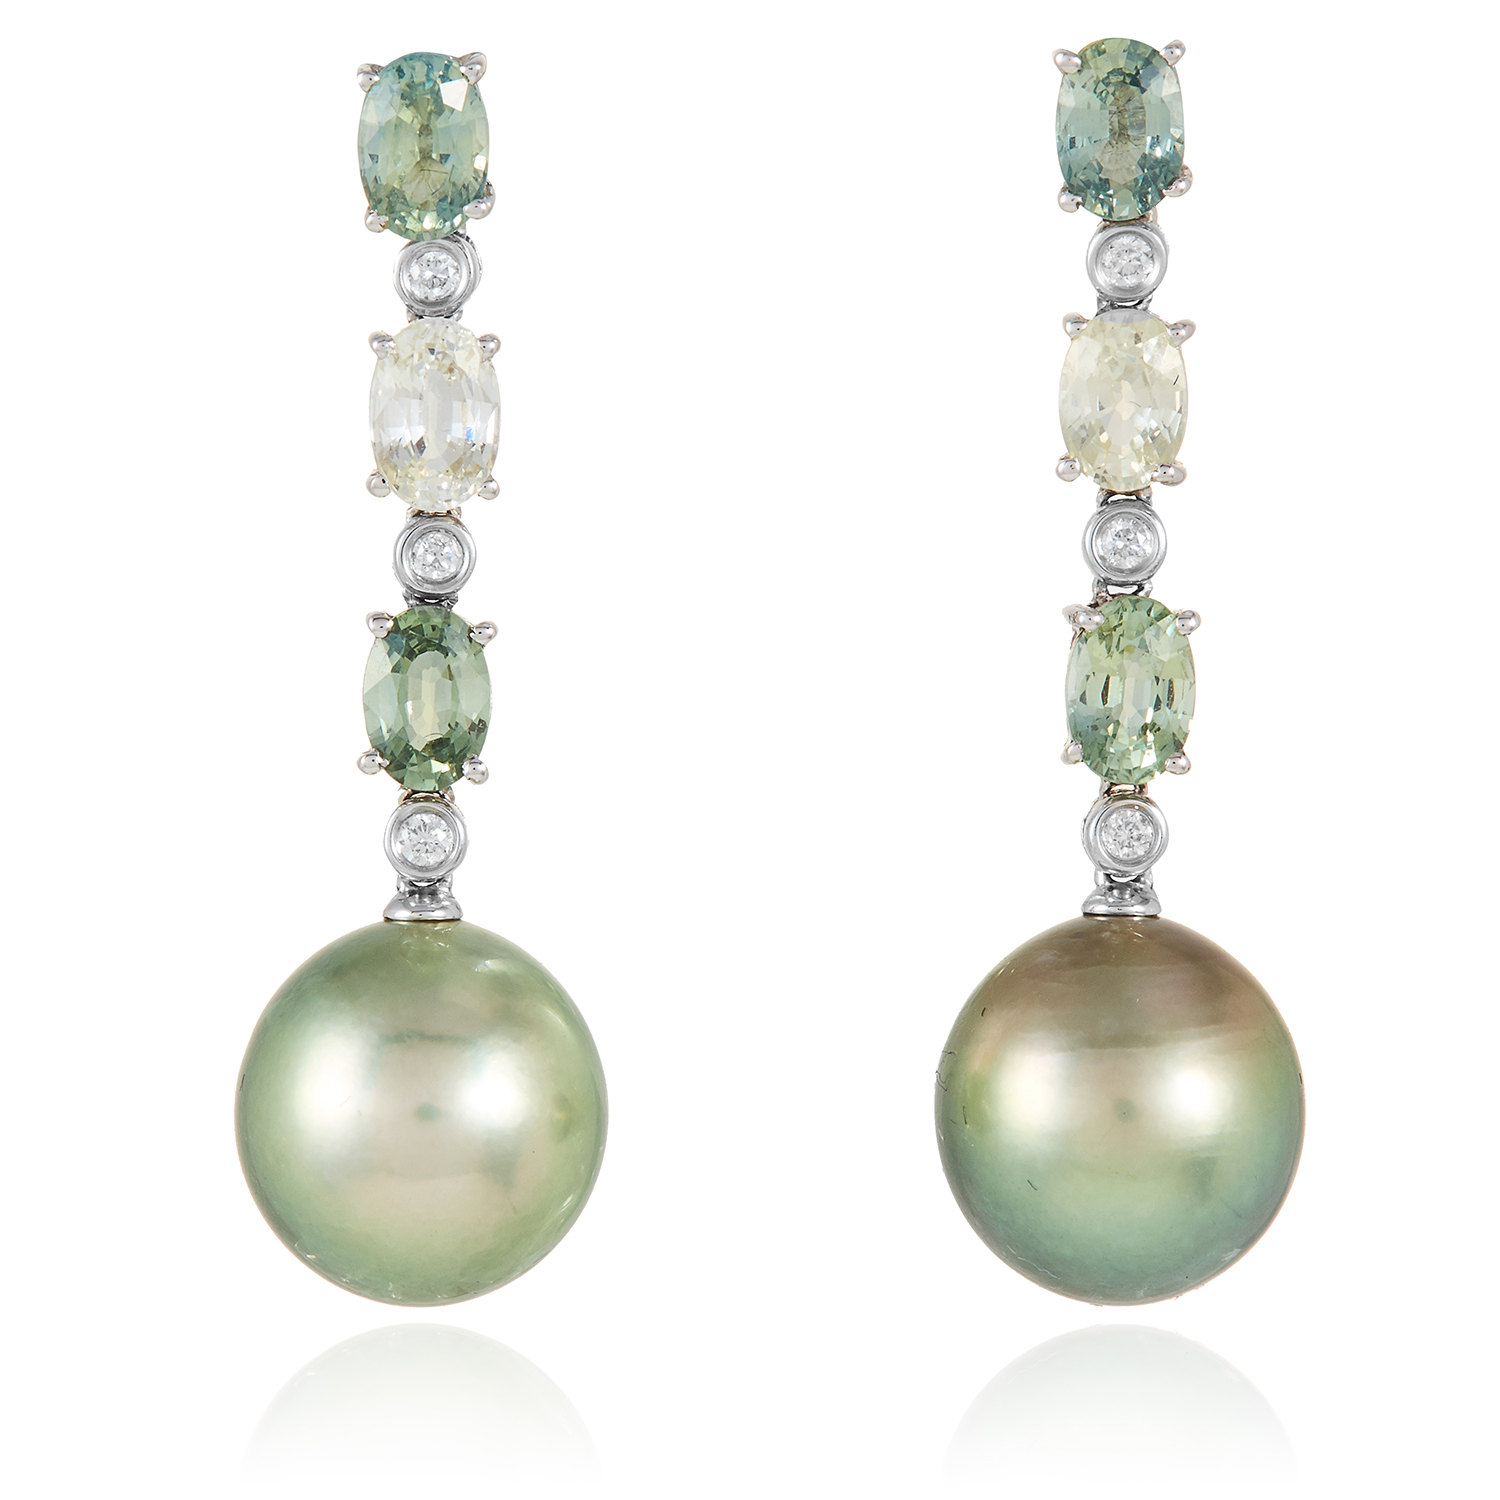 A PAIR OF SAPPHIRE, DIAMOND AND PEARL EARRINGS in 18ct white gold, each suspending a large green